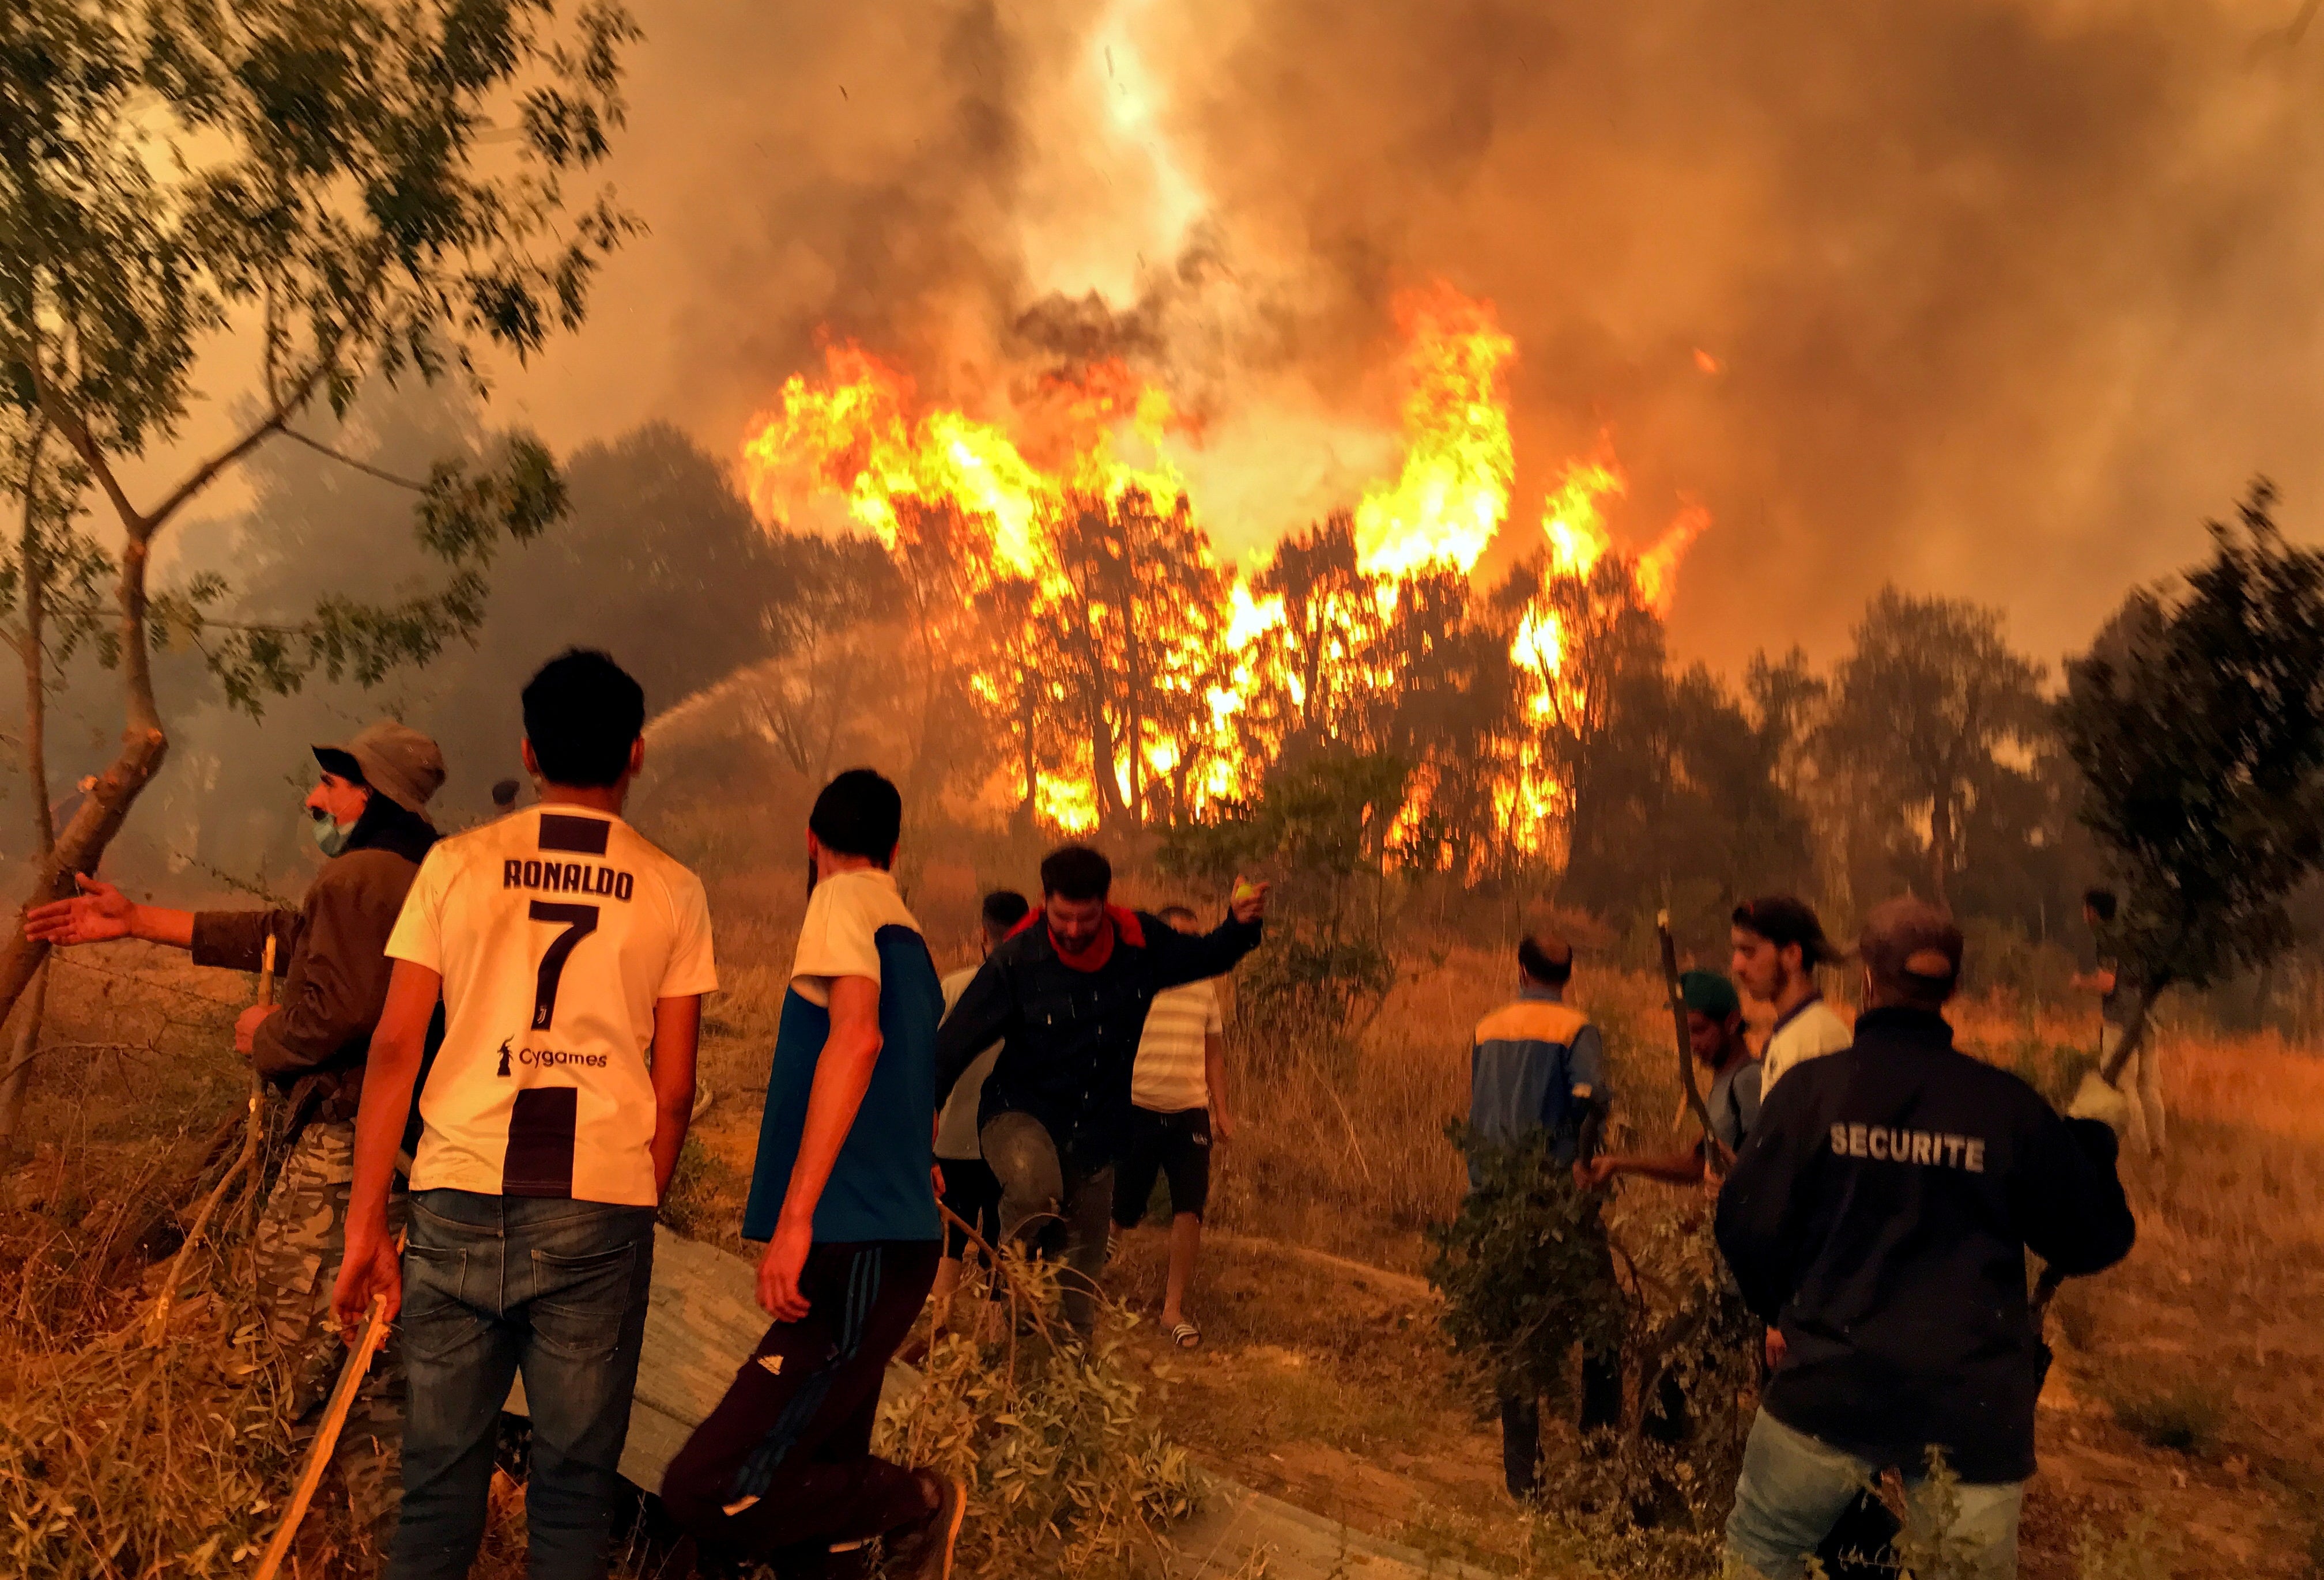 Villagers attempt to put out a wildfire in Algeria a month ago